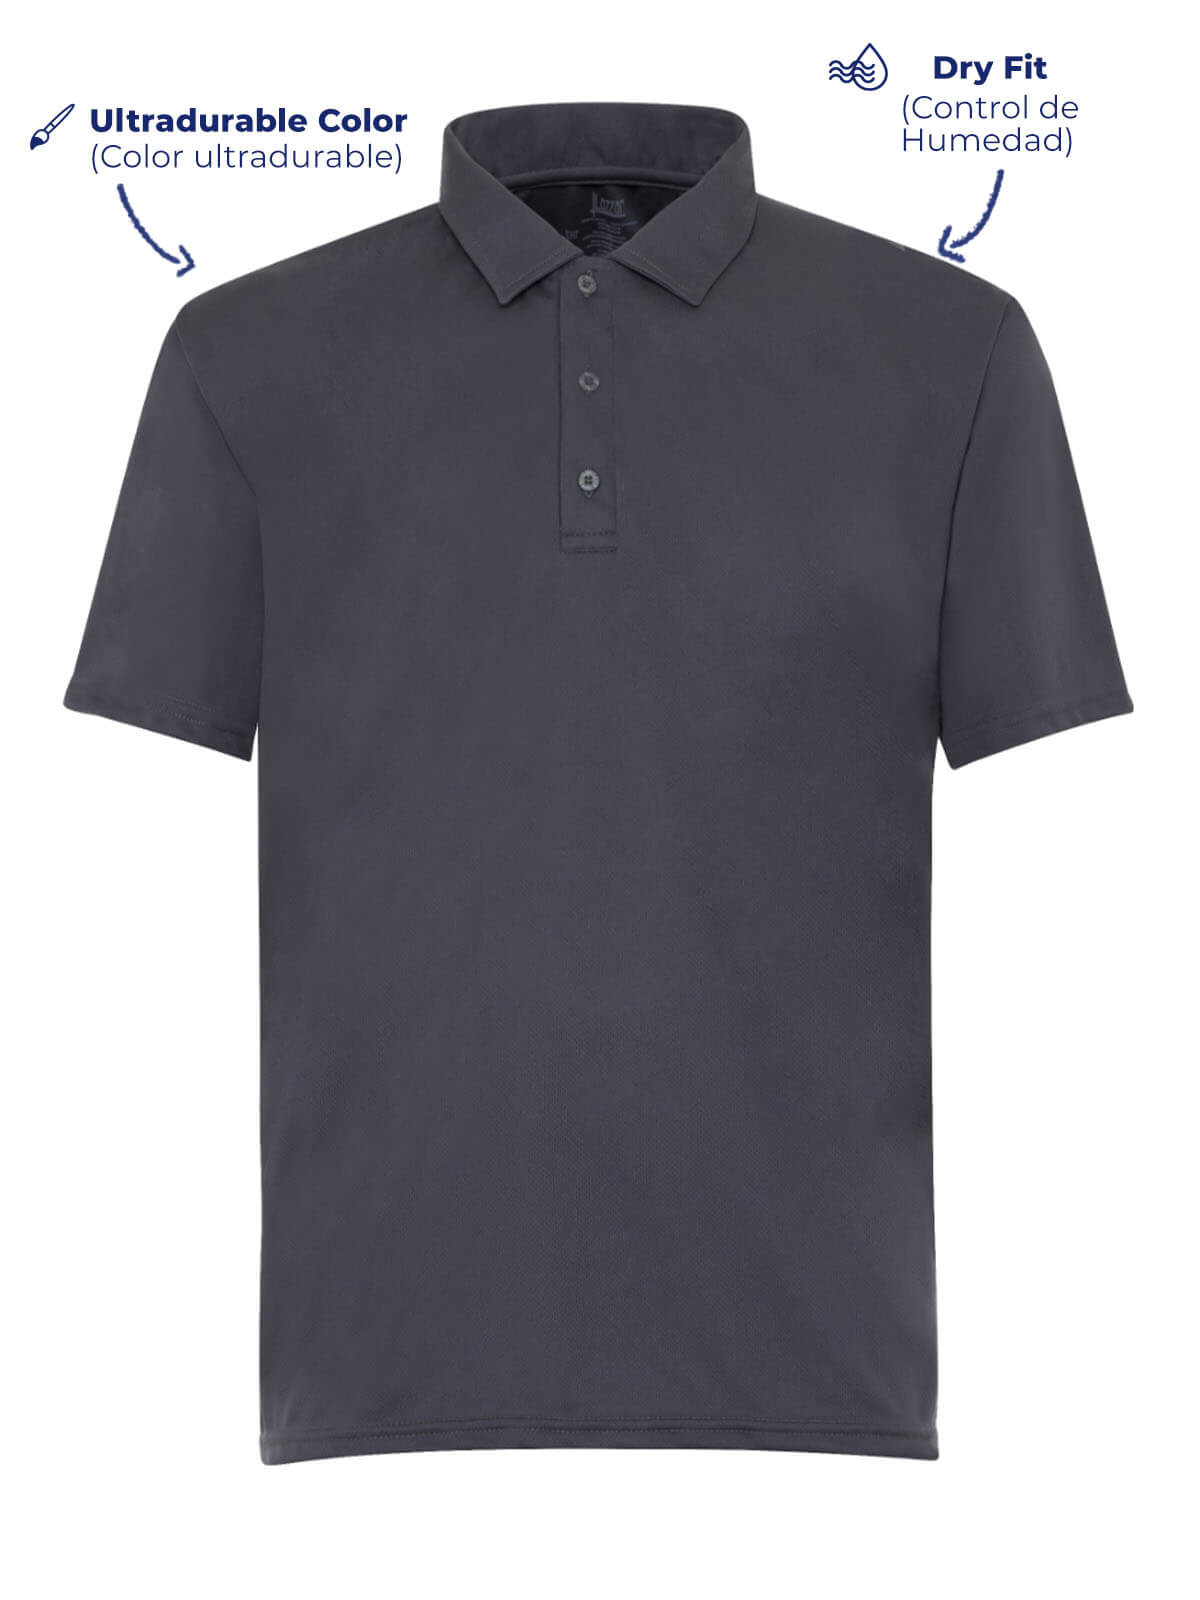 Men's grey P 900 Dry fit polo shirt front view